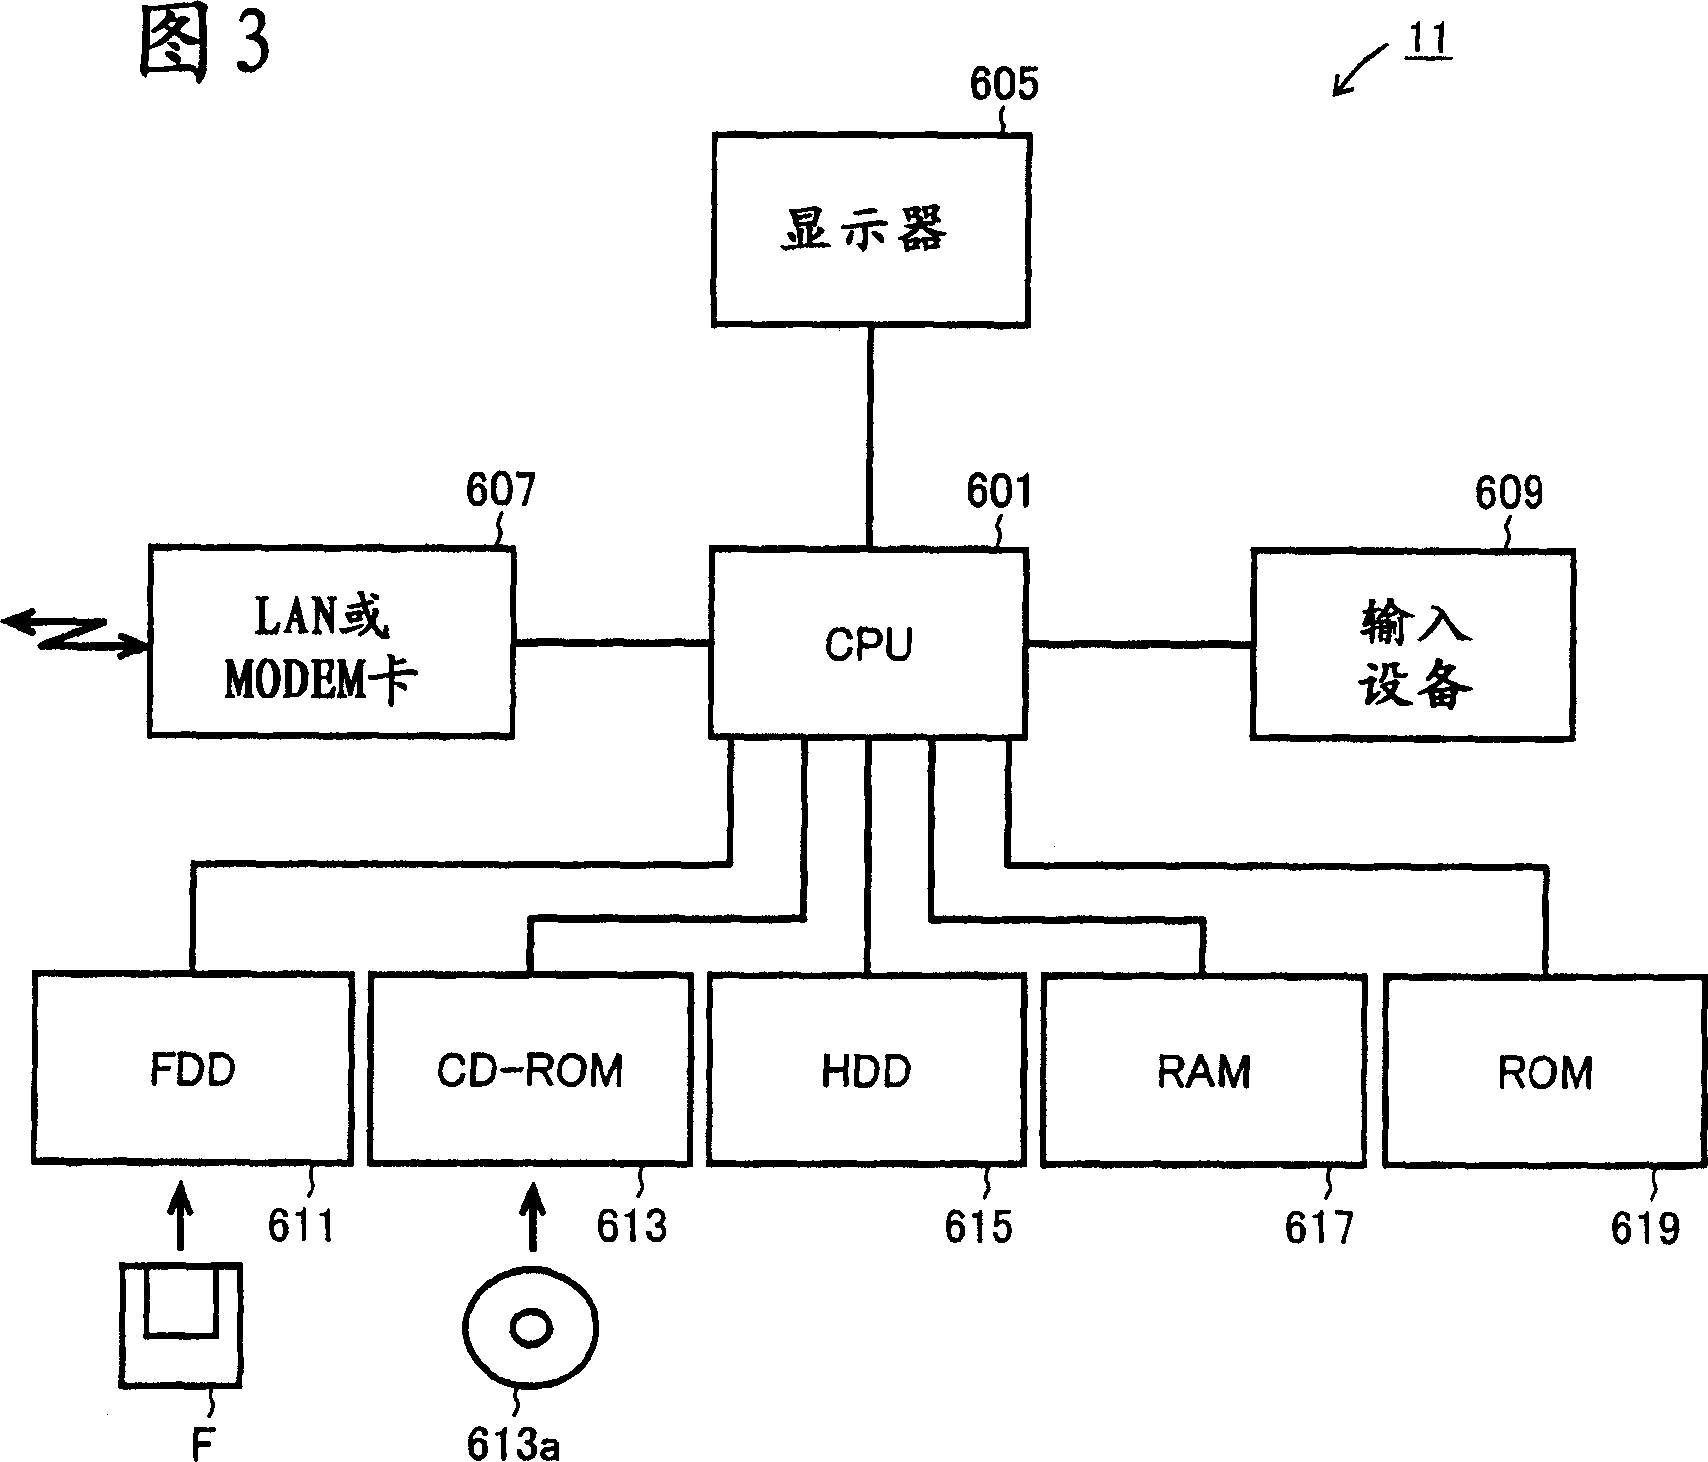 Image processing apparatus used in network environment